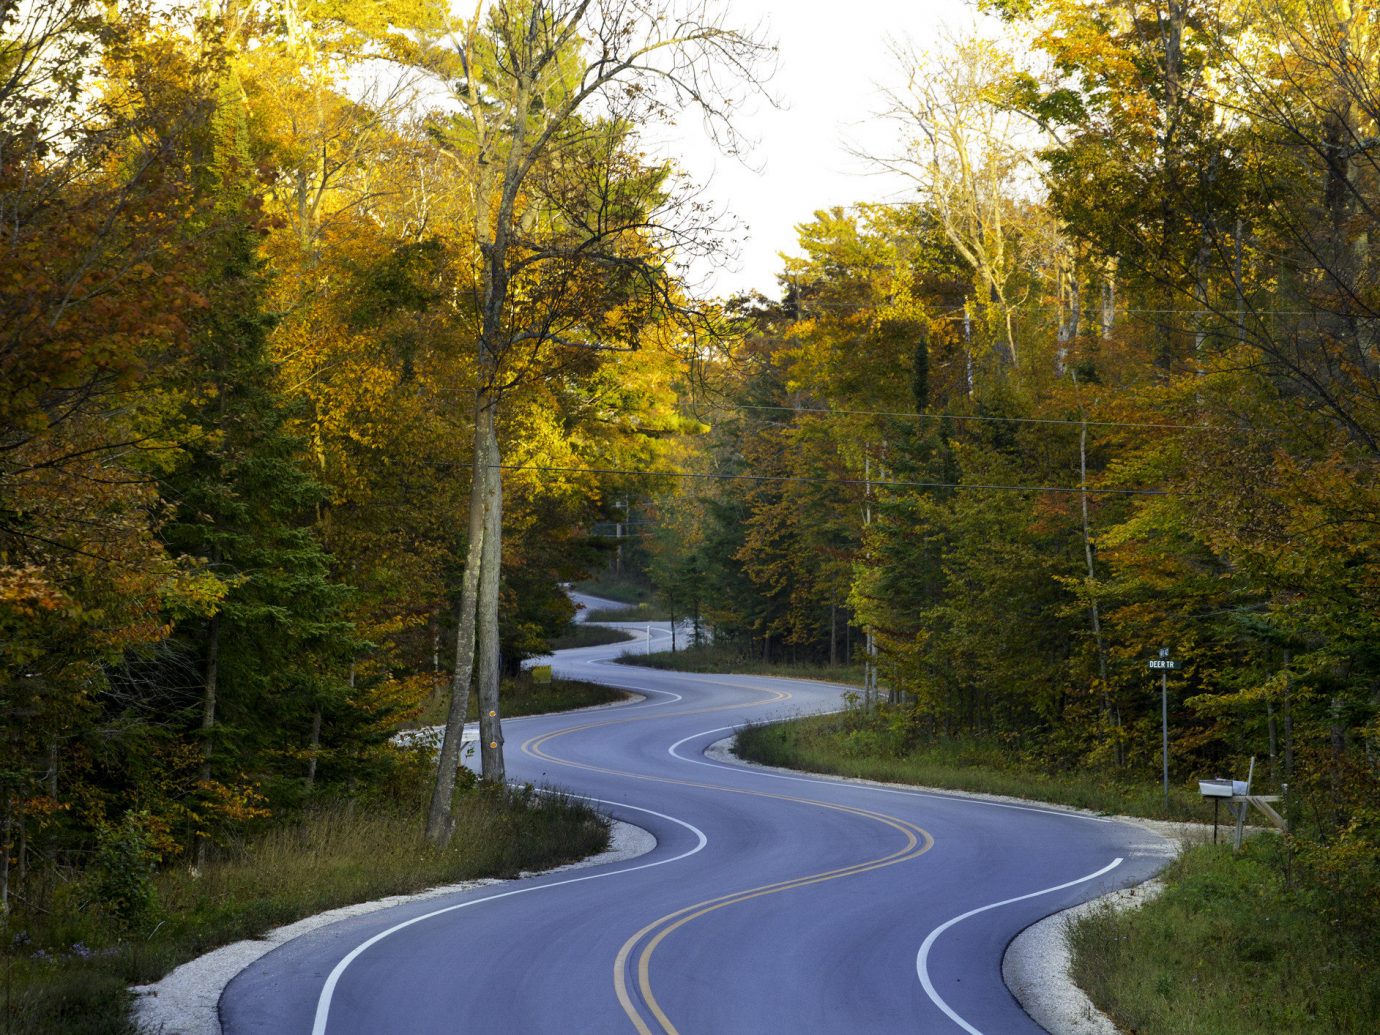 Road Trips Trip Ideas Weekend Getaways tree grass outdoor road leaf Nature yellow autumn woody plant infrastructure water plant Forest path scene way sky biome landscape reflection asphalt temperate broadleaf and mixed forest wooded woodland surrounded traveling